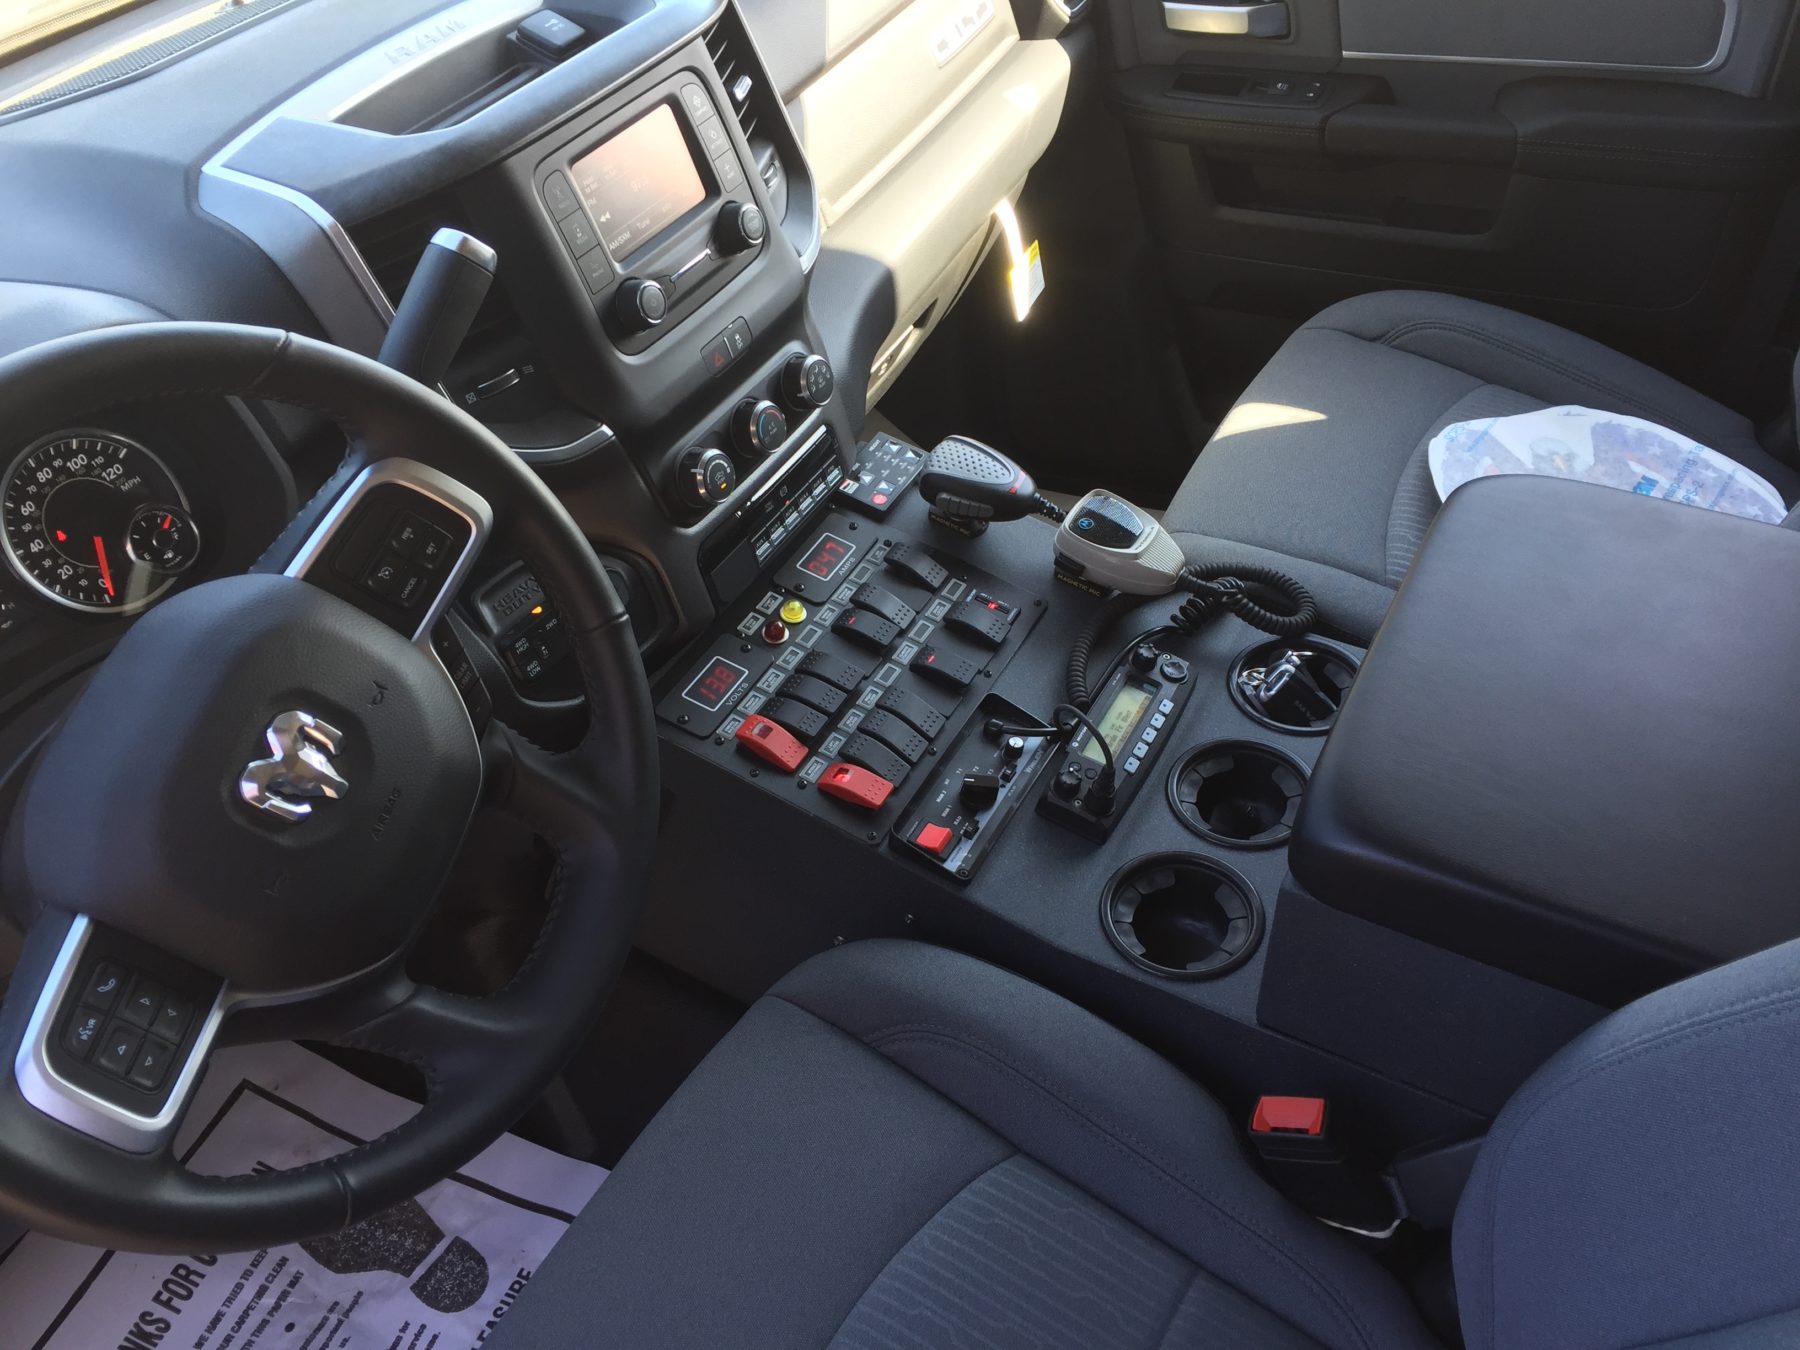 2019 Ram 4500 4x4 Heavy Duty Ambulance For Sale – Picture 9